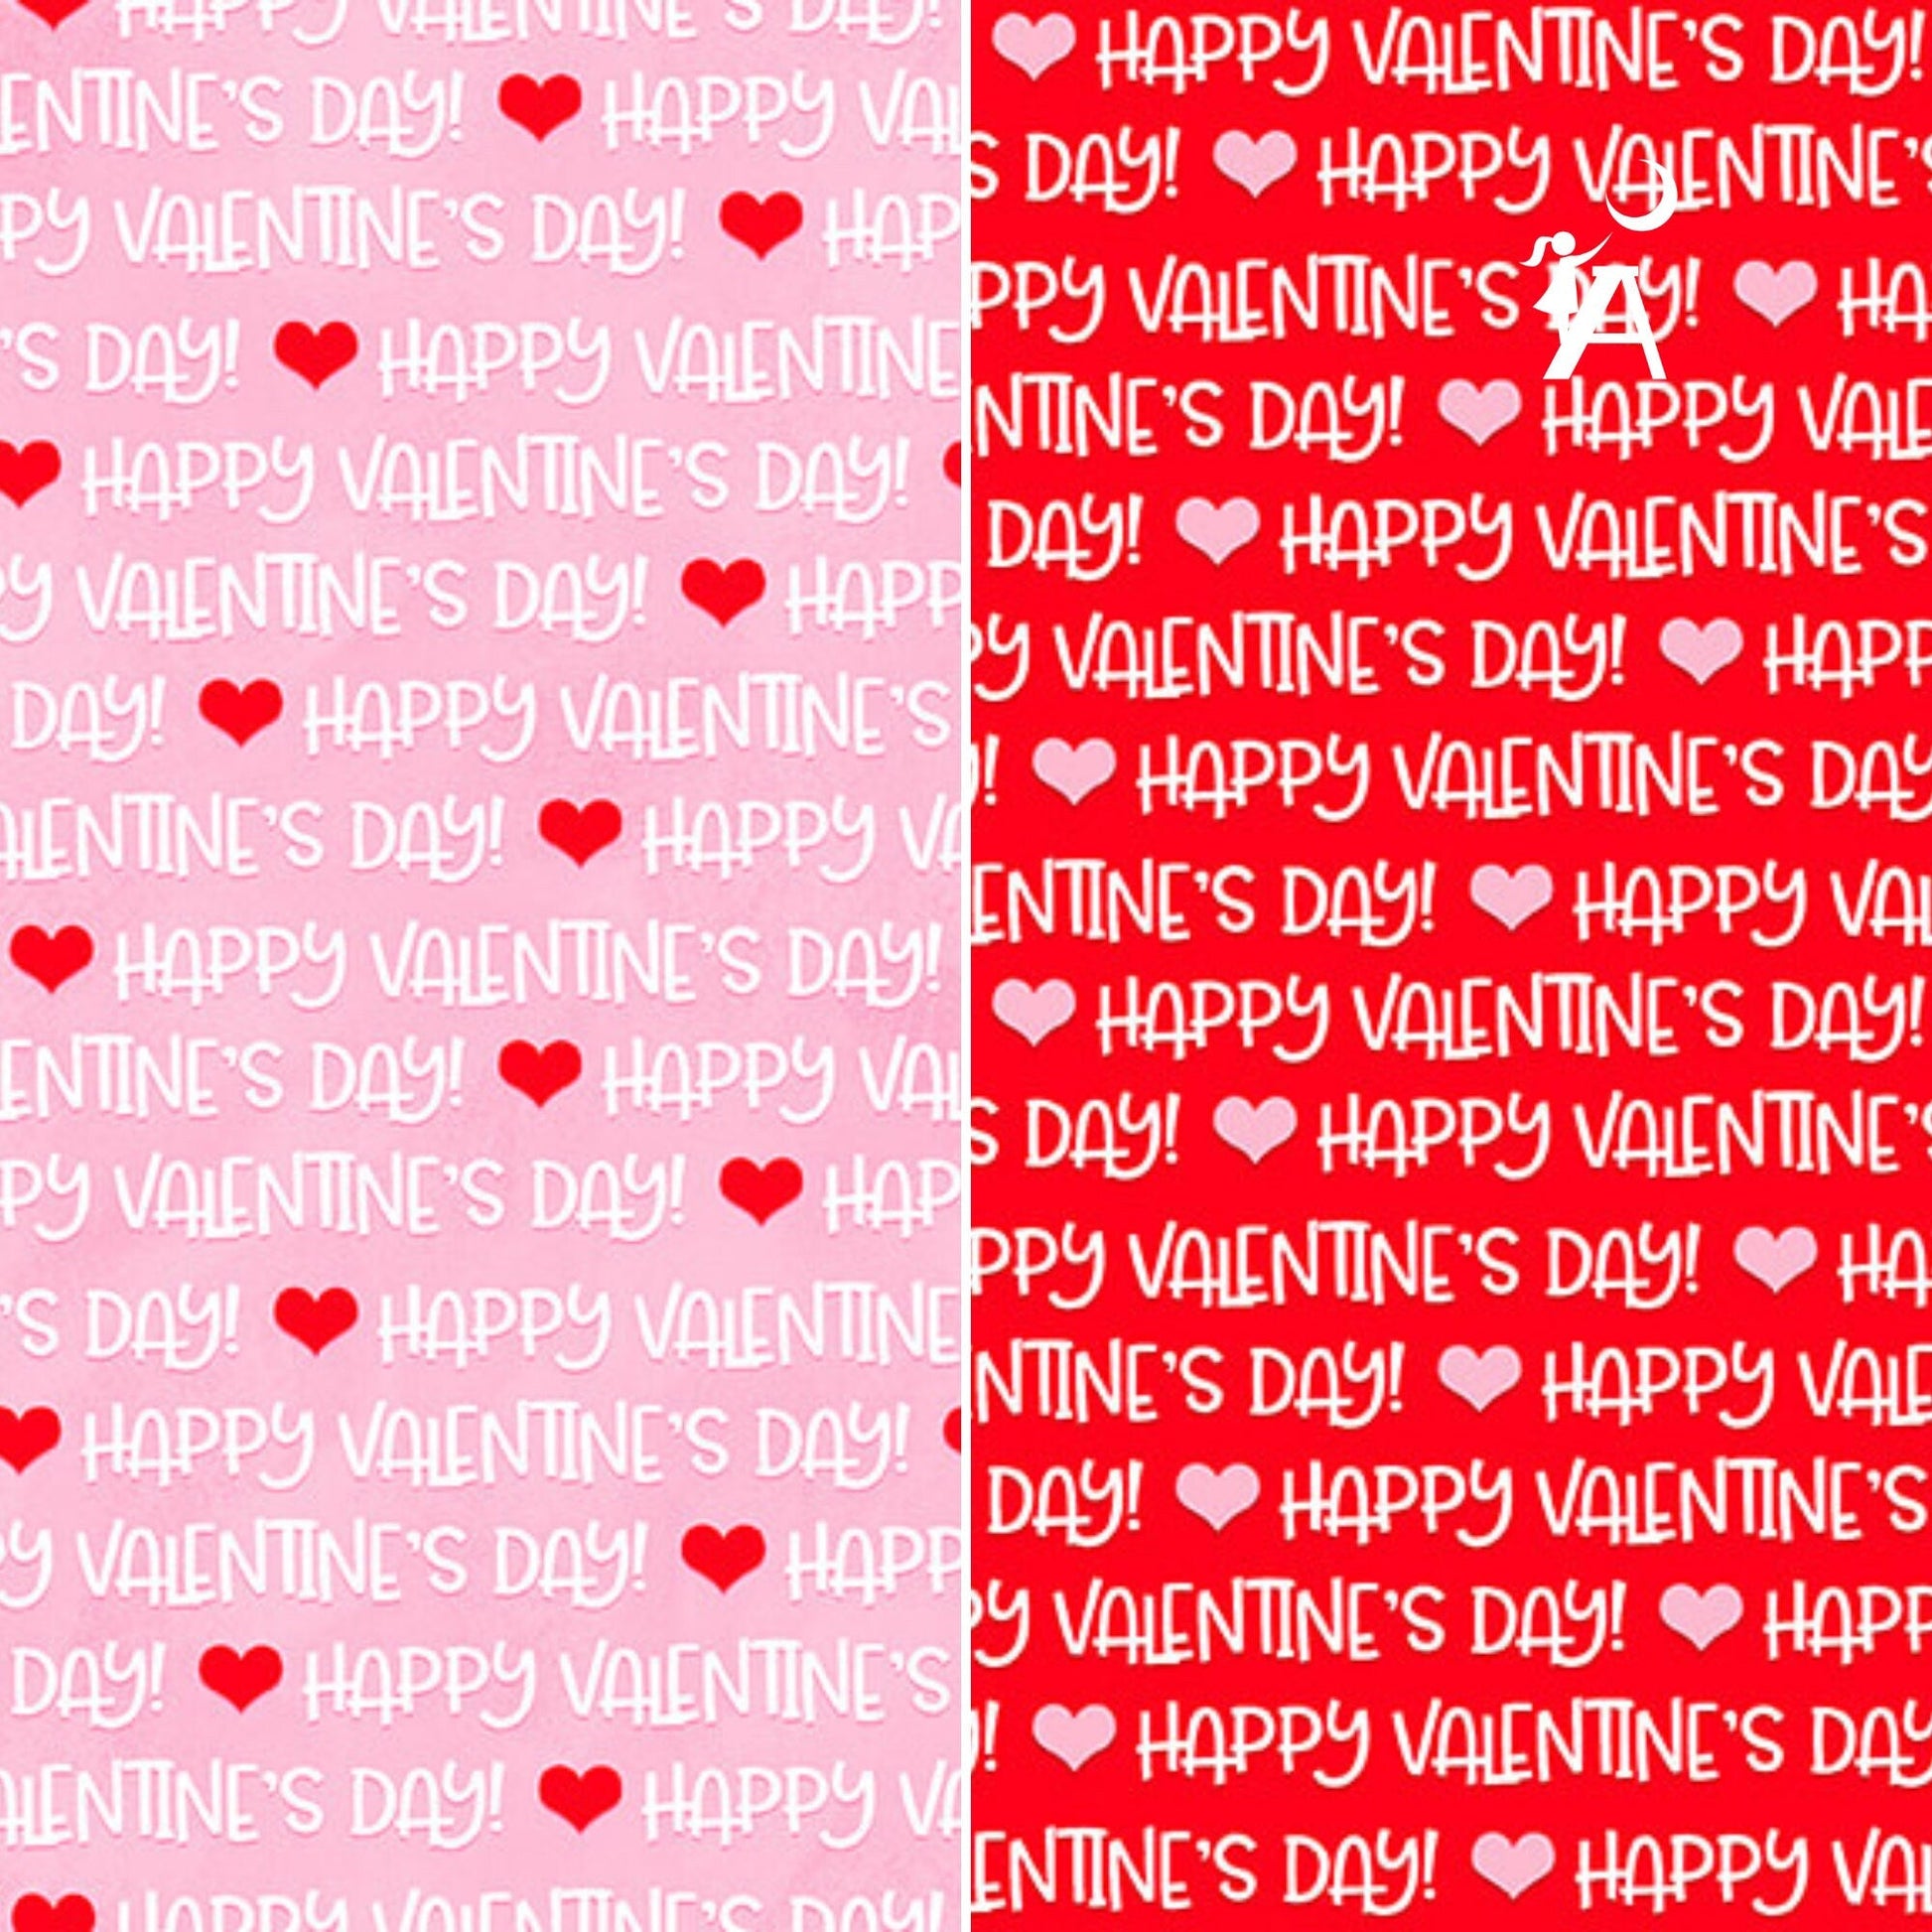 Henry Glass Gnomie Love Gnome Valentine's Day Fabric - Patchwork Cheater Quilt Cotton Fabric by the Yard